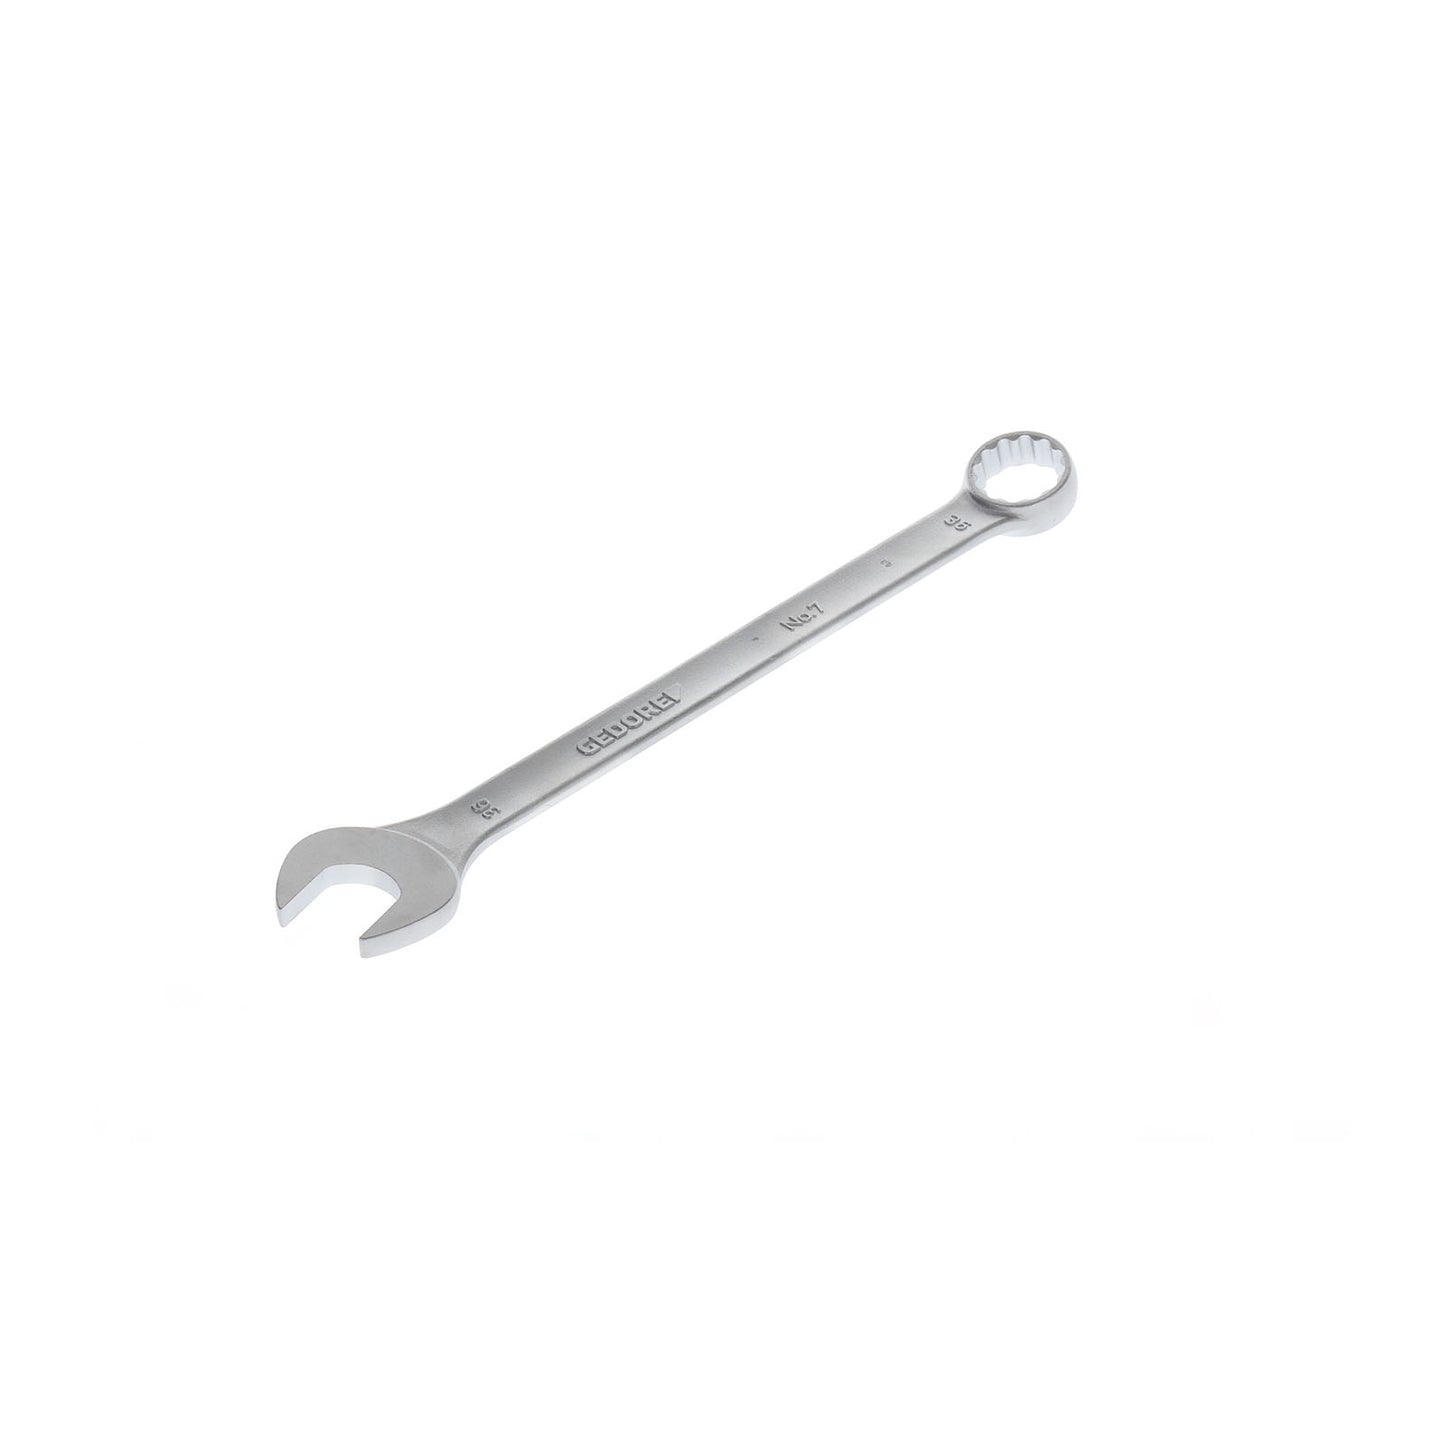 GEDORE 7 36 - Combination Wrench, 36 mm (6089470)